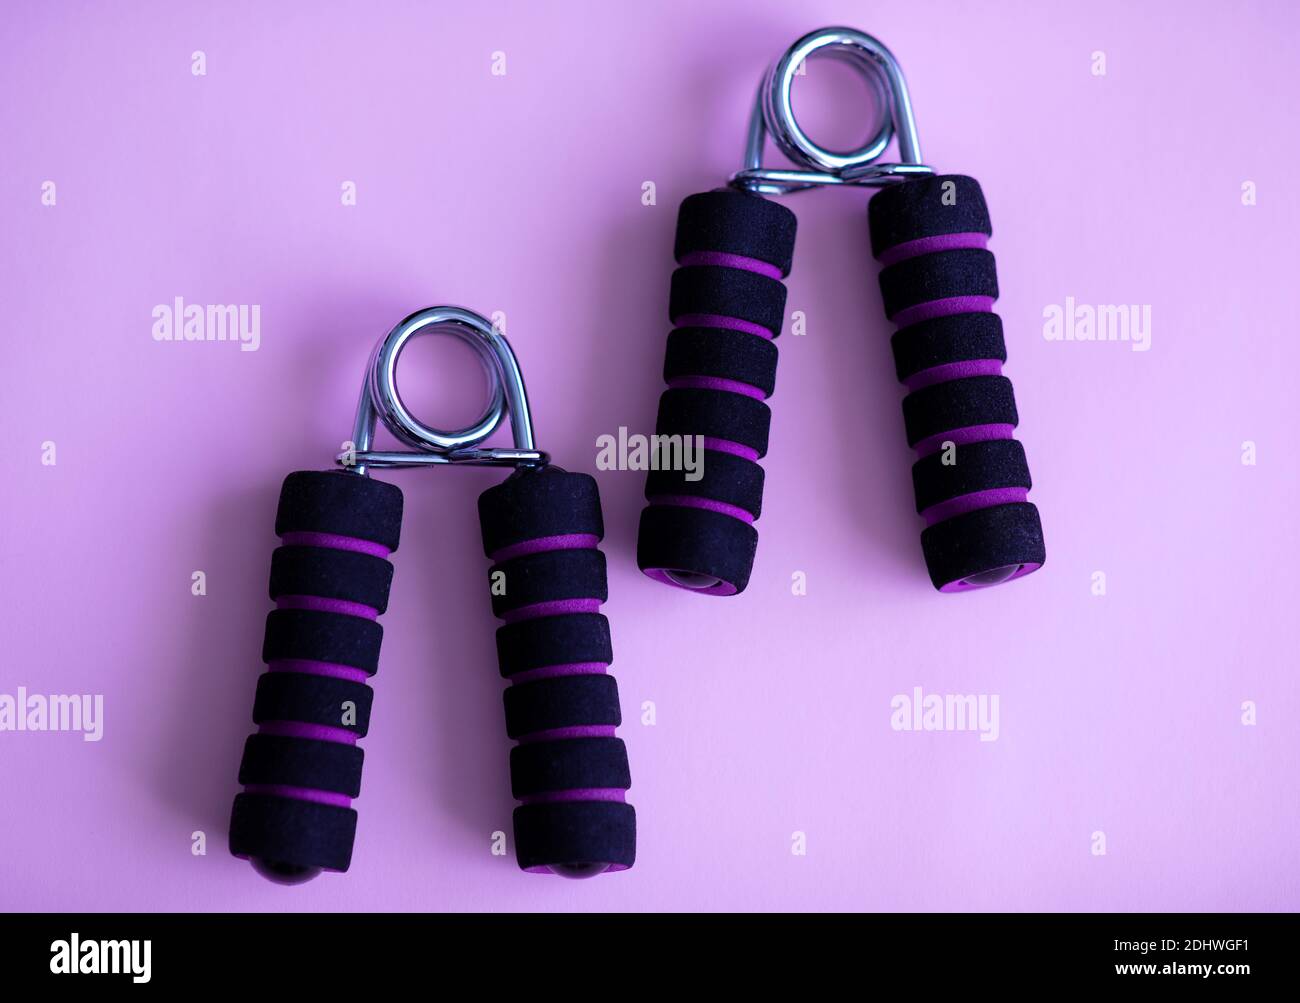 Hand grip strengthener for hand exerciser on a purple background Stock Photo